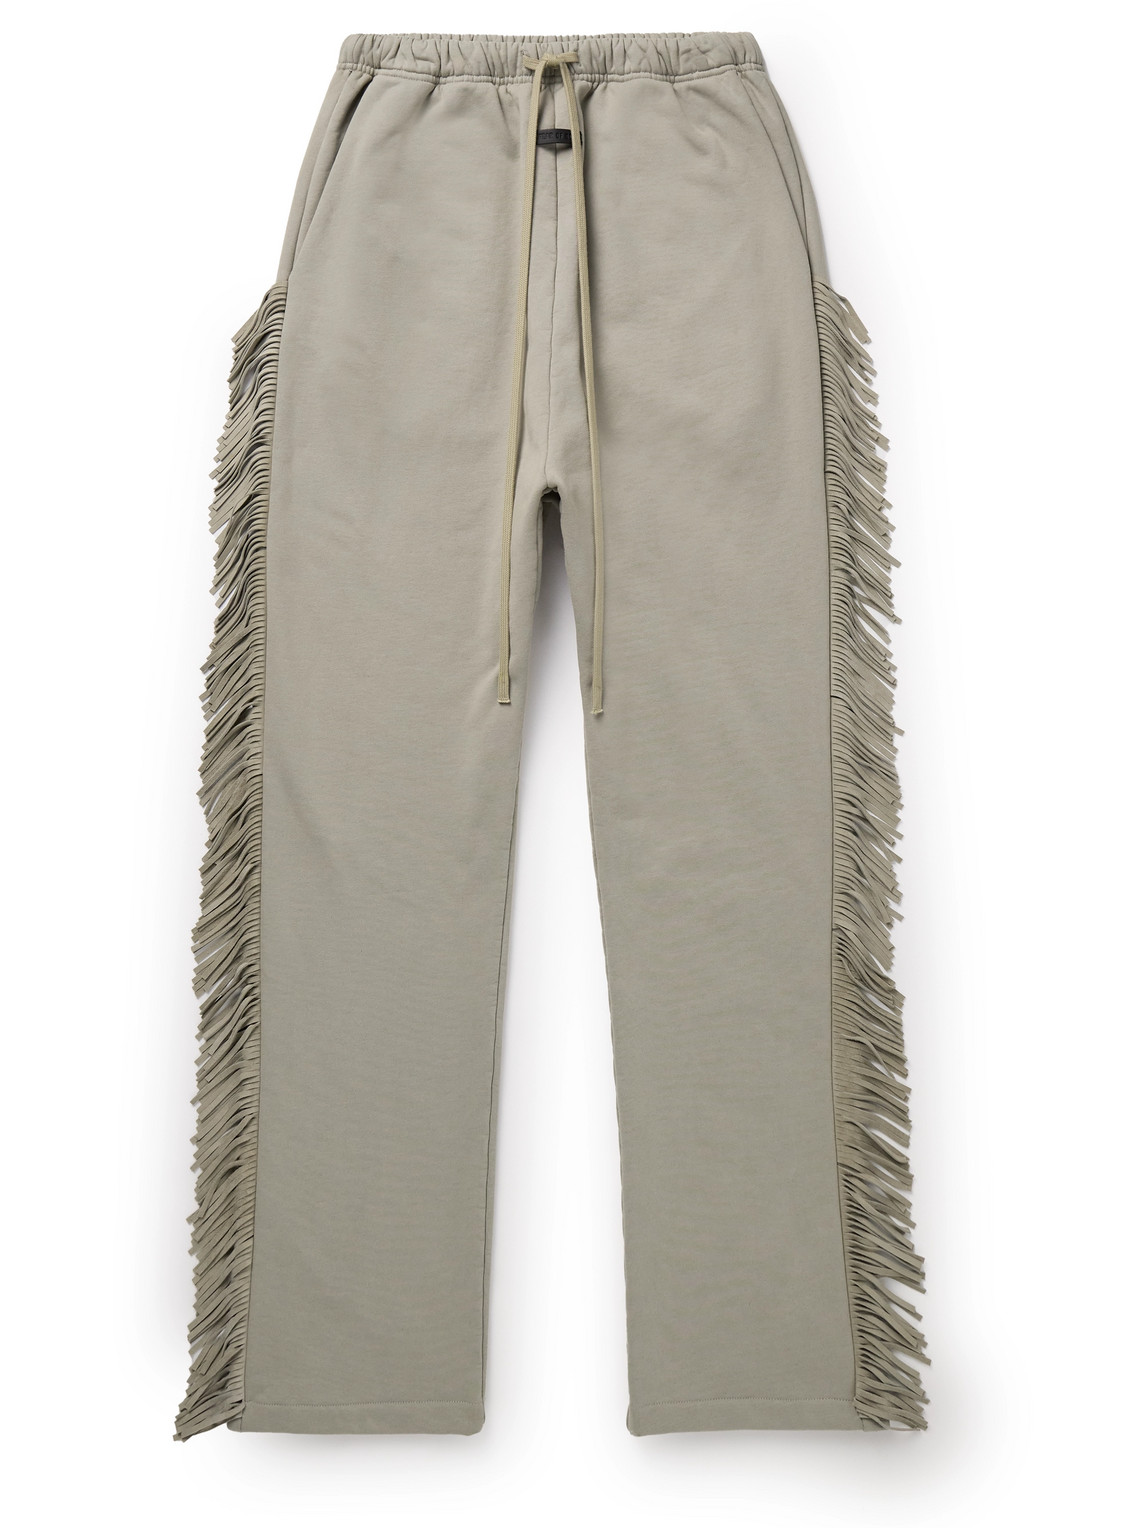 Fear of God - Straight-Leg Fringed Suede-Trimmed Cotton-Jersey Sweatpants - Men - Green - M von Fear of God